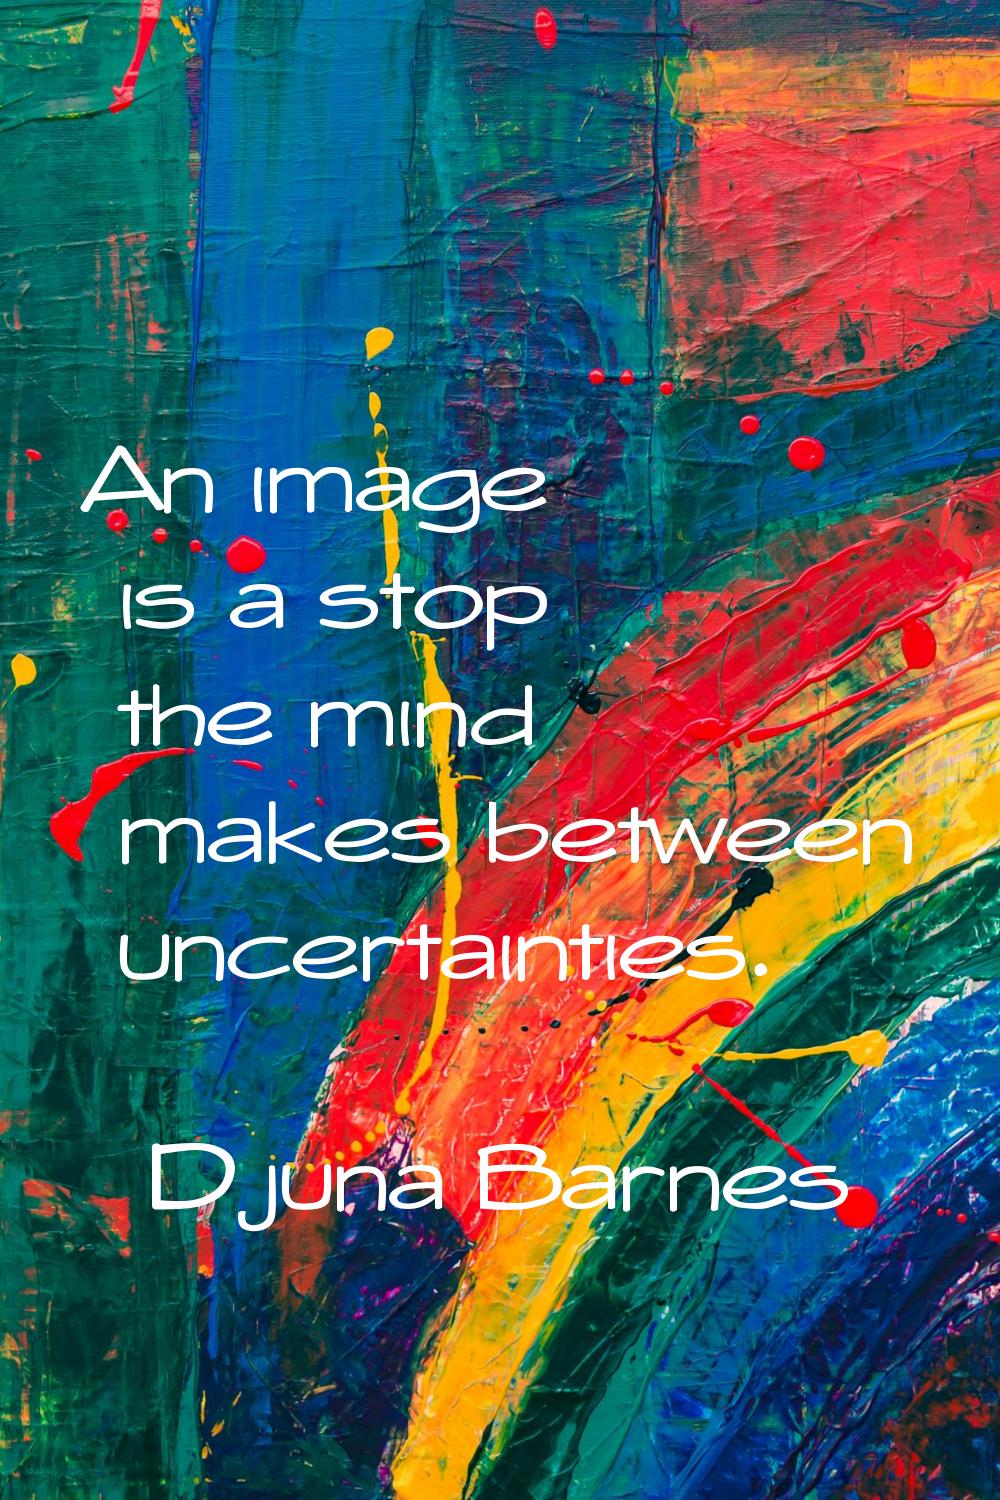 An image is a stop the mind makes between uncertainties.